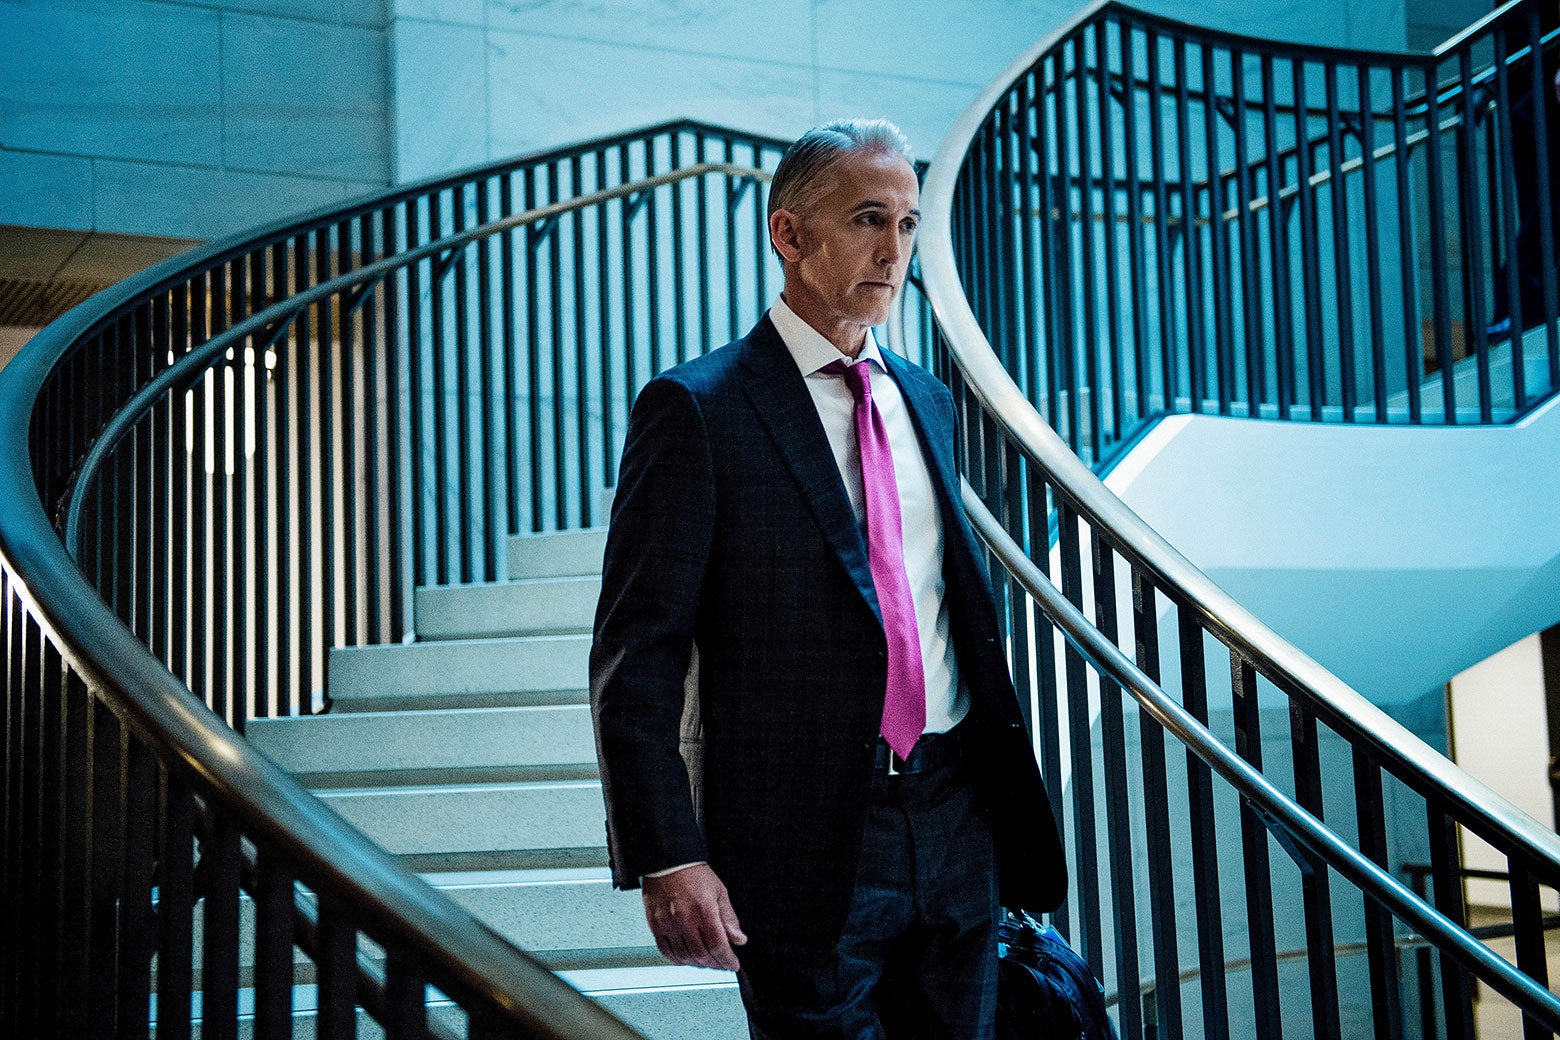 South Carolina Rep. Trey Gowdy arrives for a closed session with Donald Trump Jr. before the House Intelligence Committee on Capitol Hill on Dec. 6.